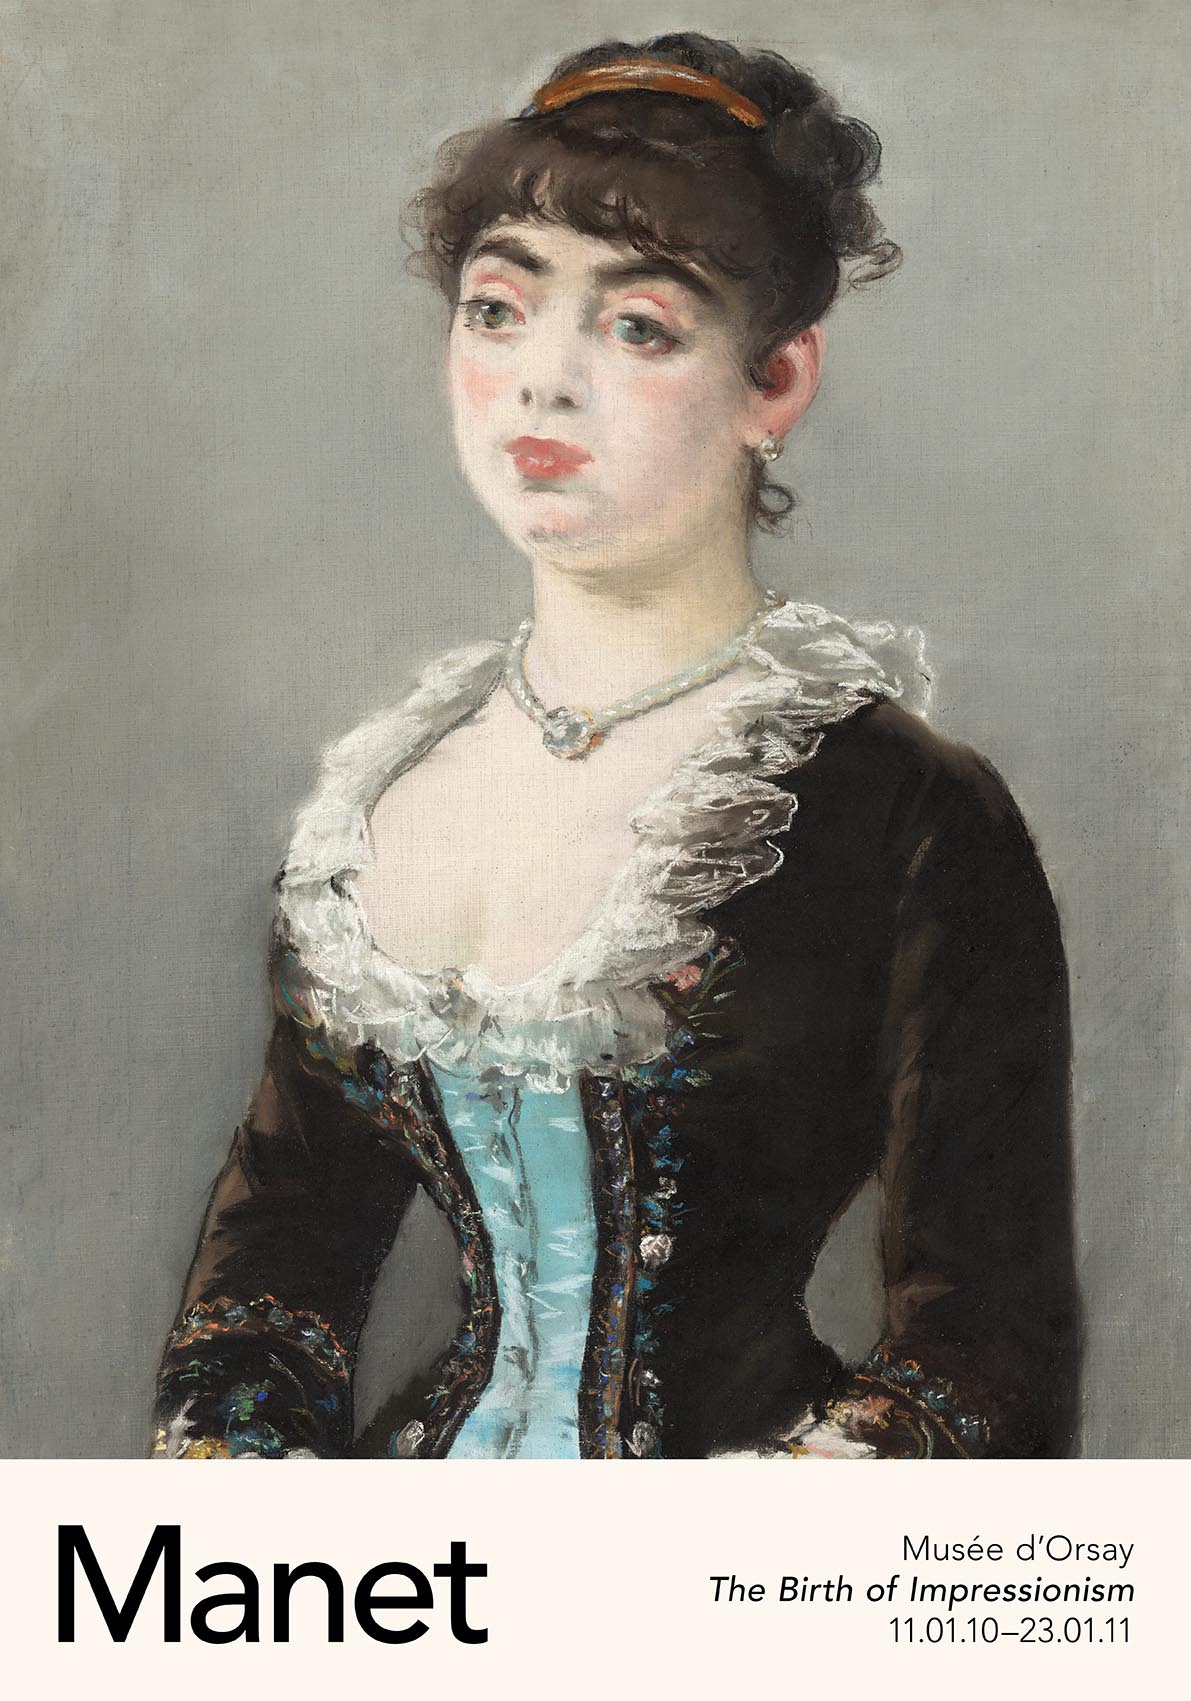 Madame Michel Levy by Manet Exhibition Poster